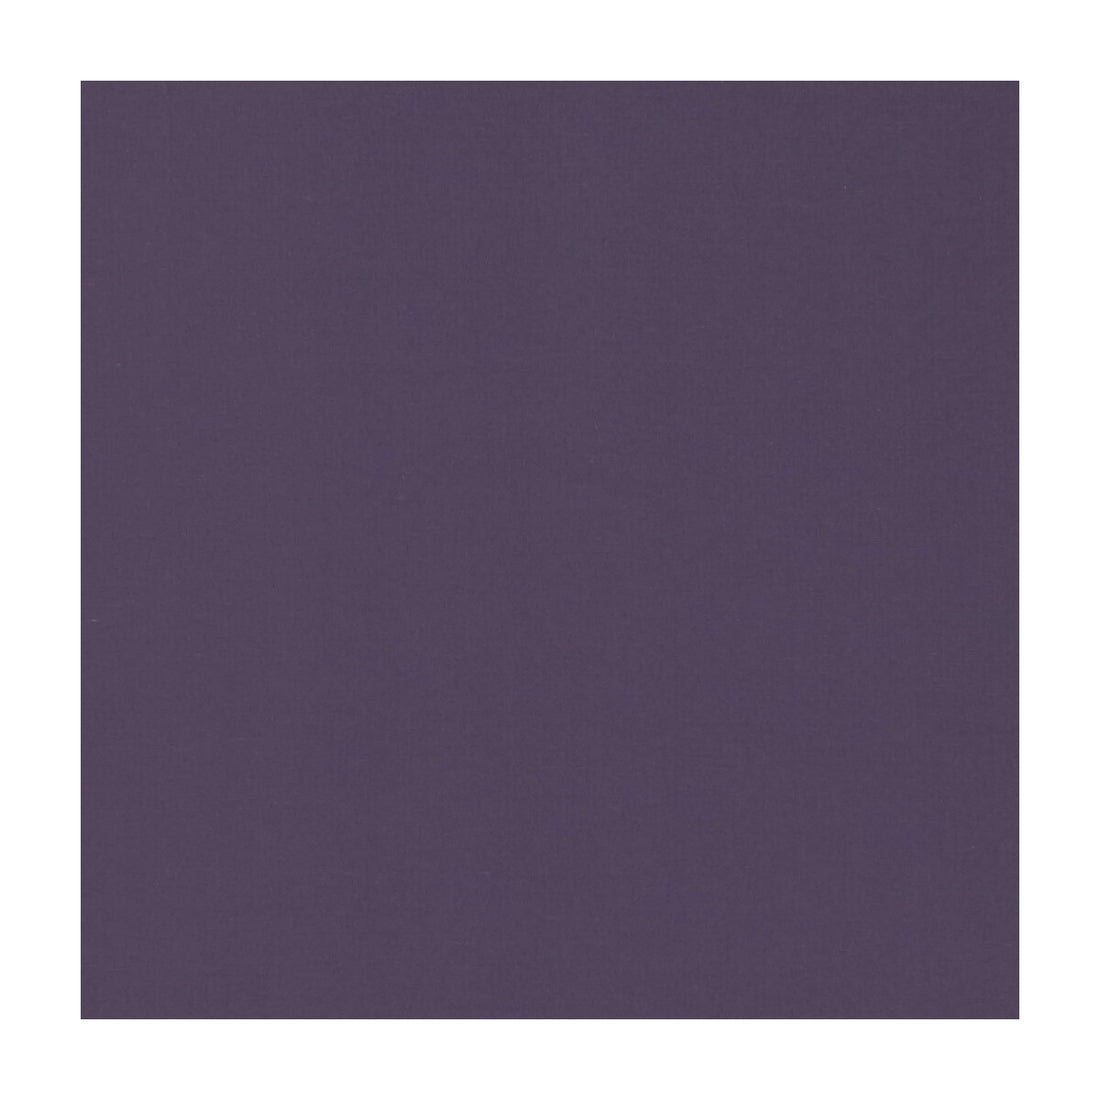 Novara fabric in damson color - pattern F1294/15.CAC.0 - by Clarke And Clarke in the Clarke &amp; Clarke Novara collection